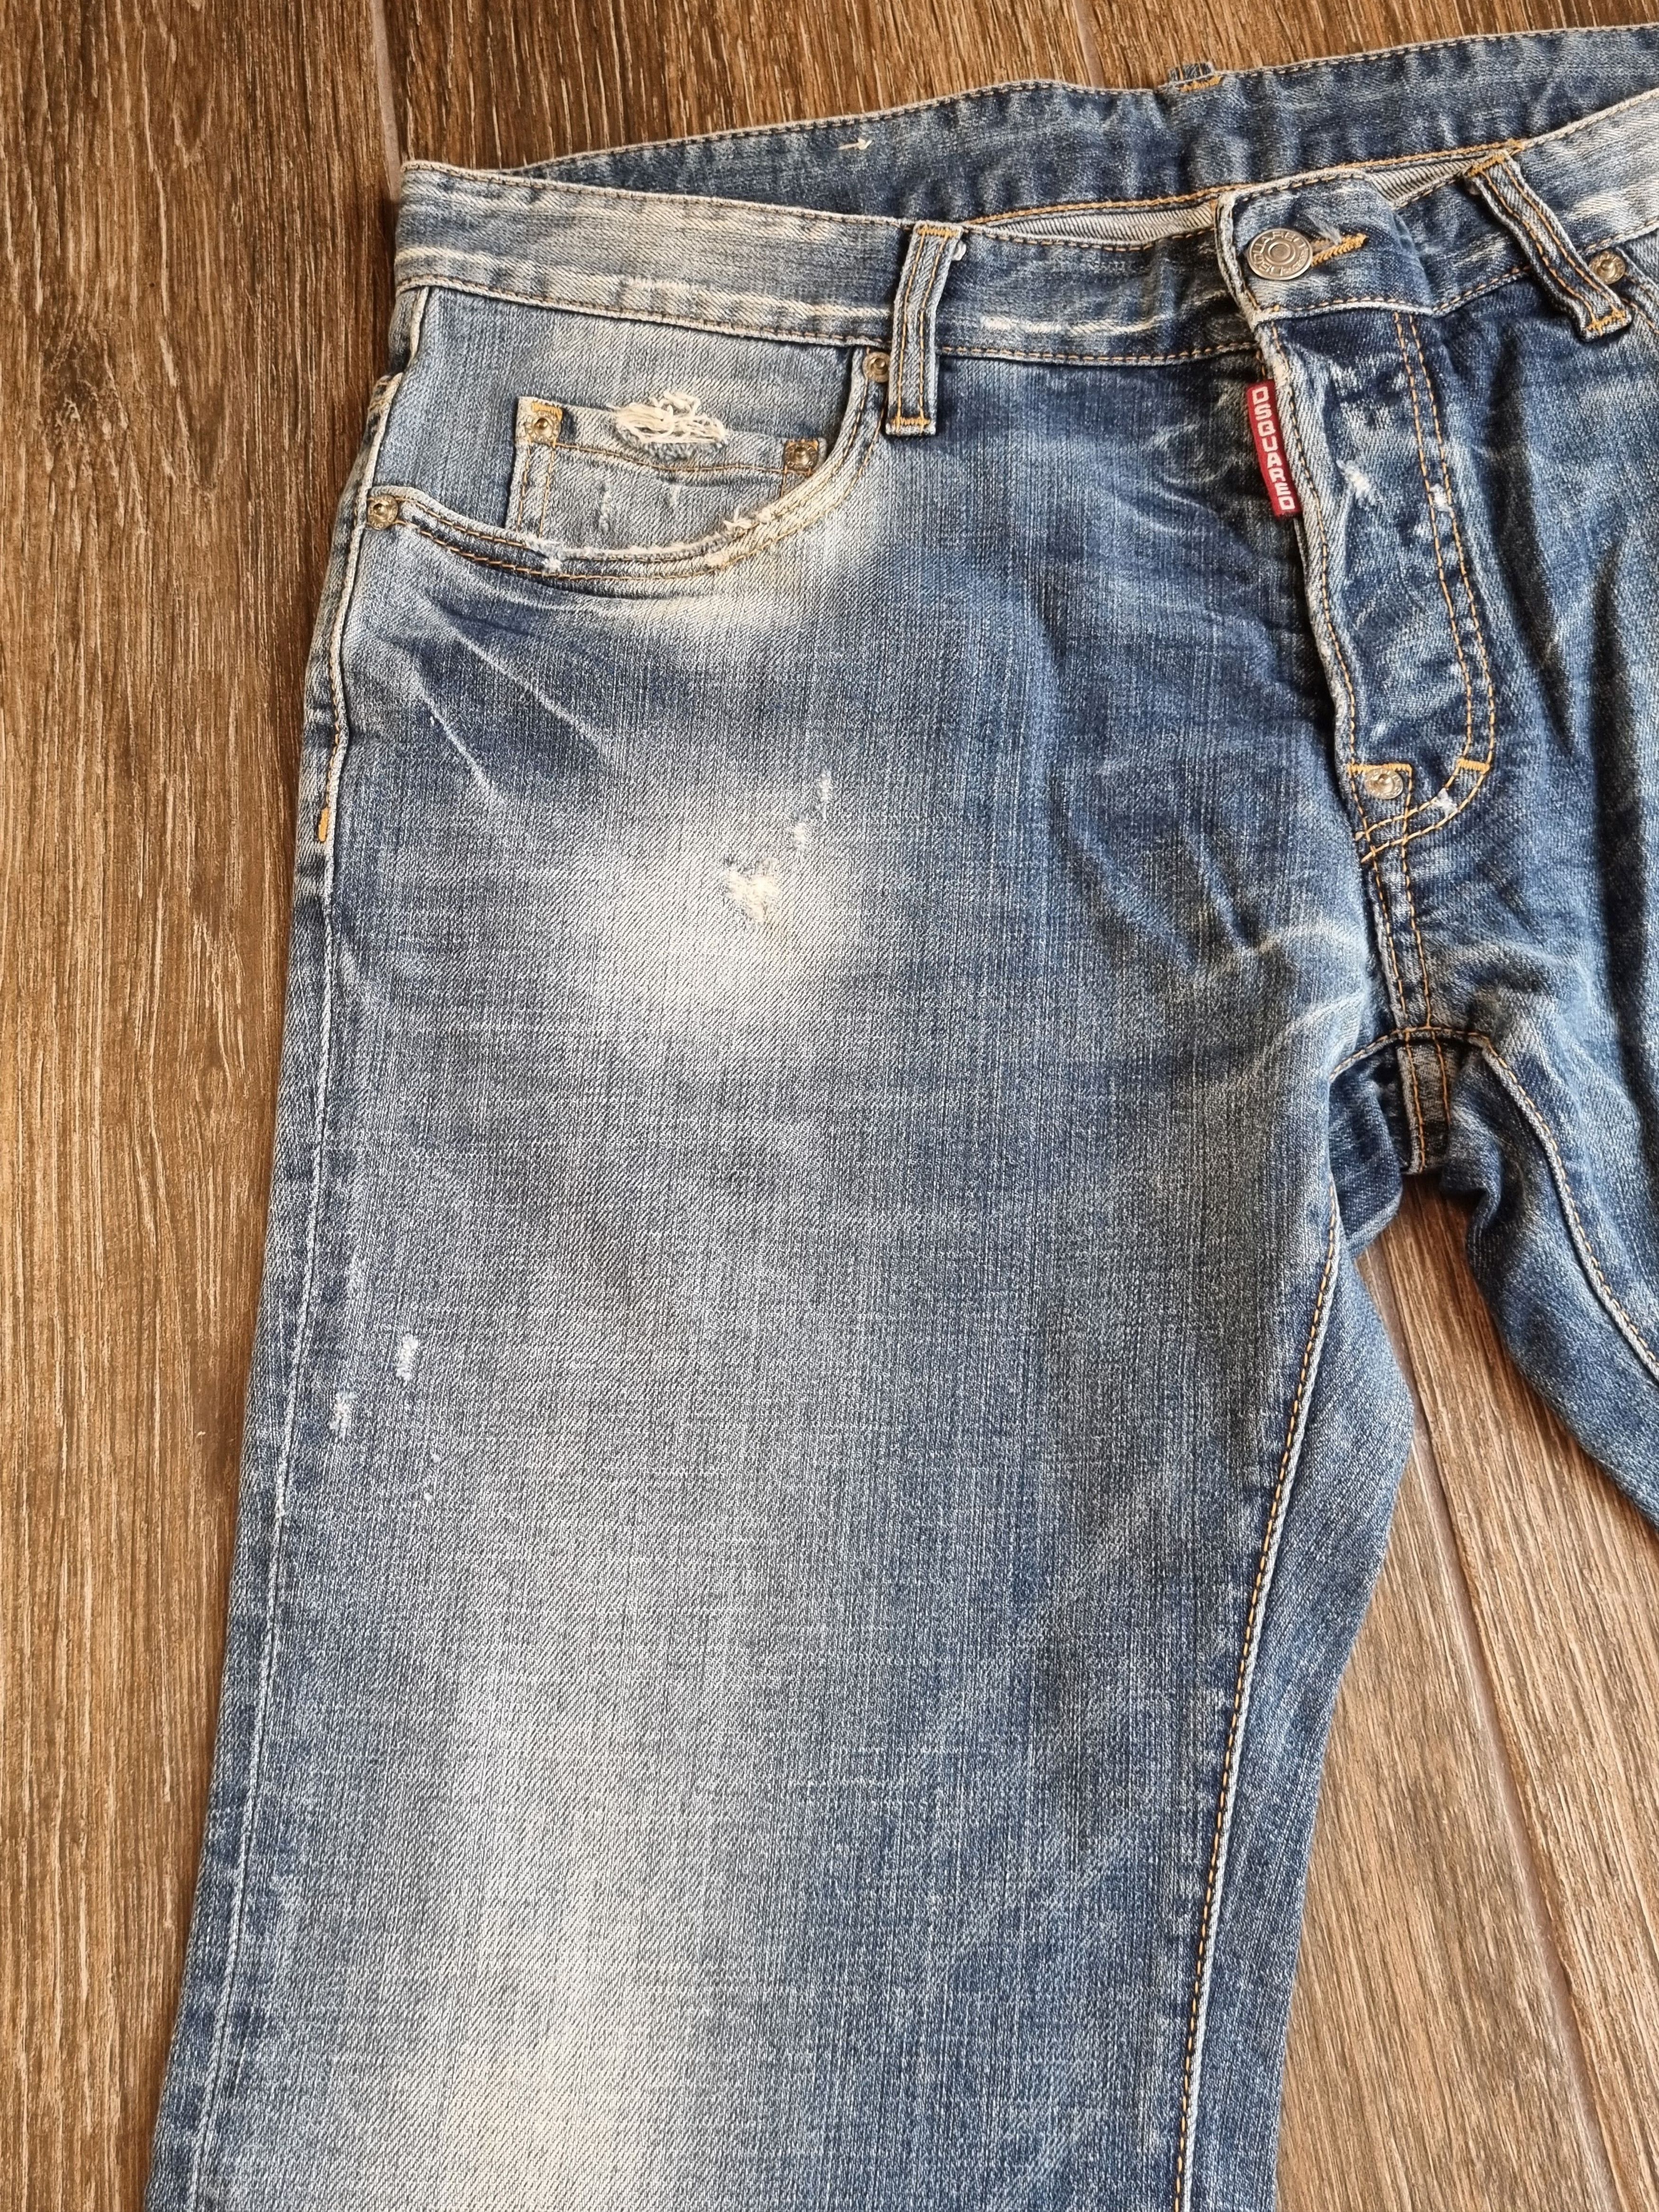 'It's A Hard Knock Life' stonewashed distressed jeans - 2